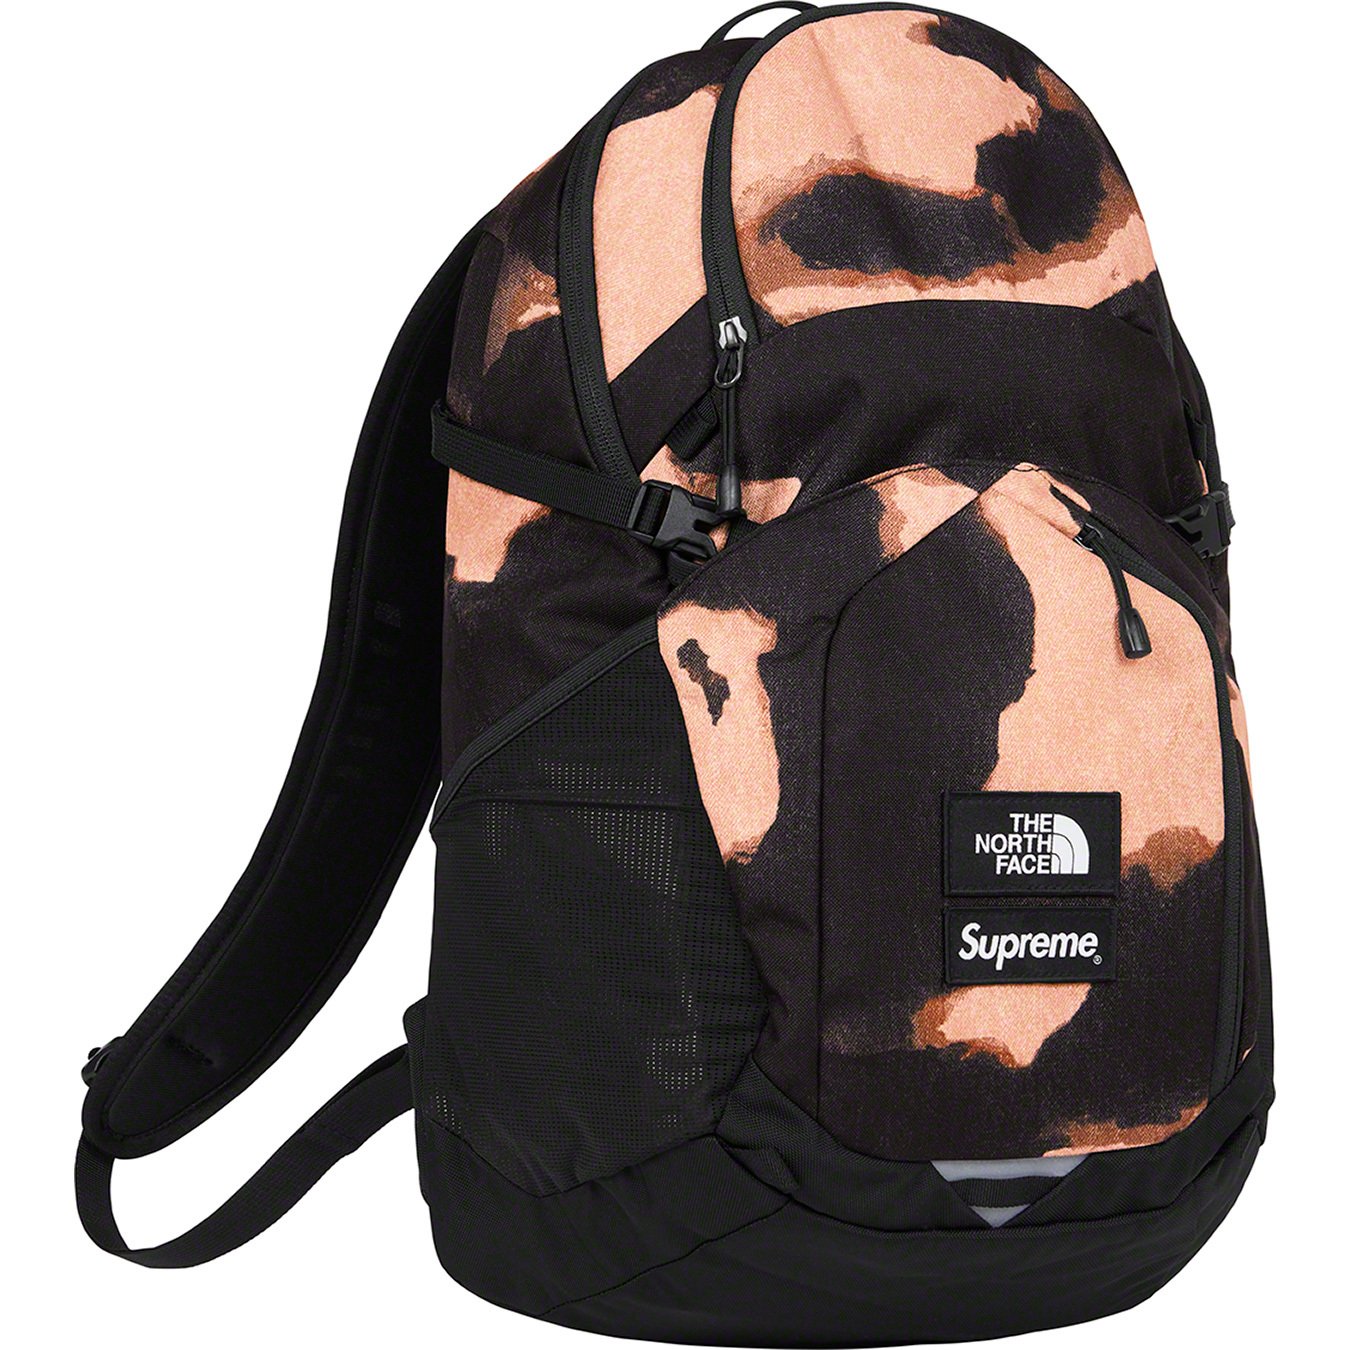 The North Face Bleached Denim Print Pocono Backpack - fall winter 